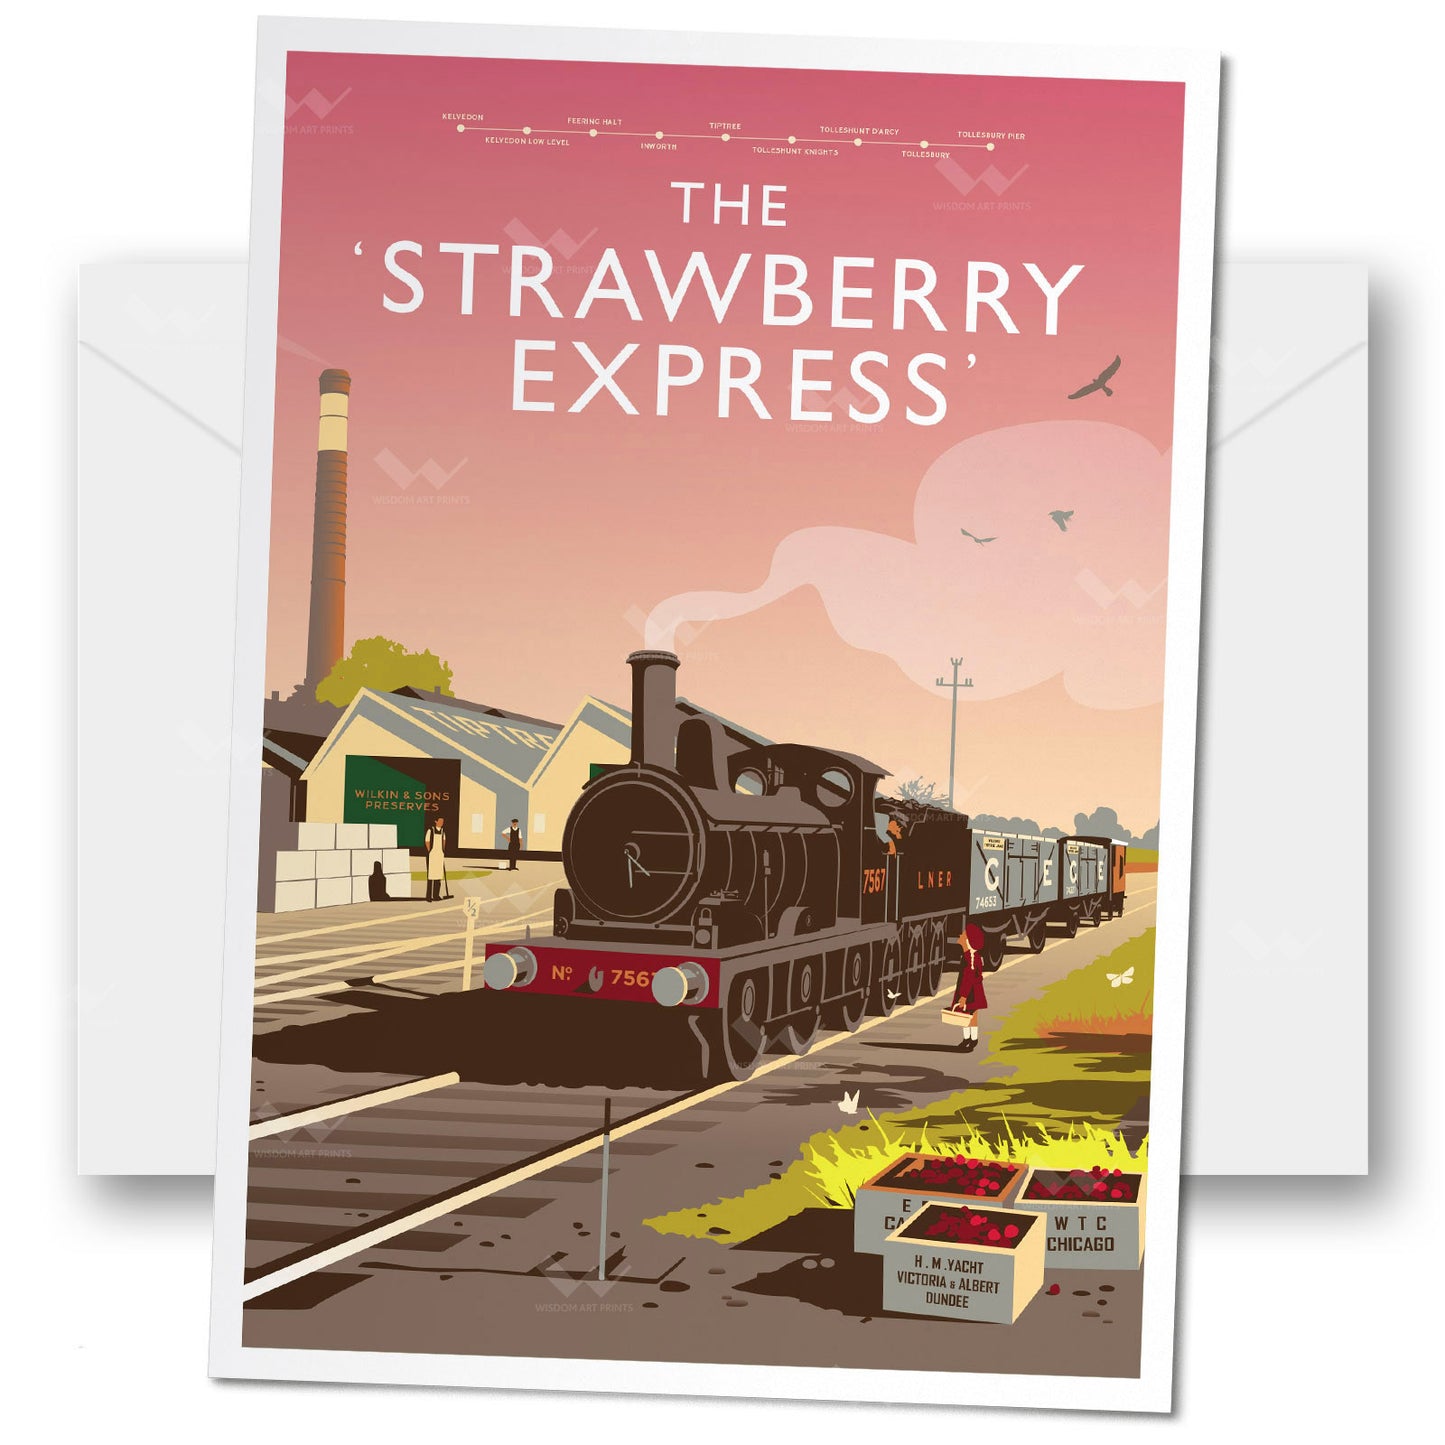 The 'Strawberry Express'